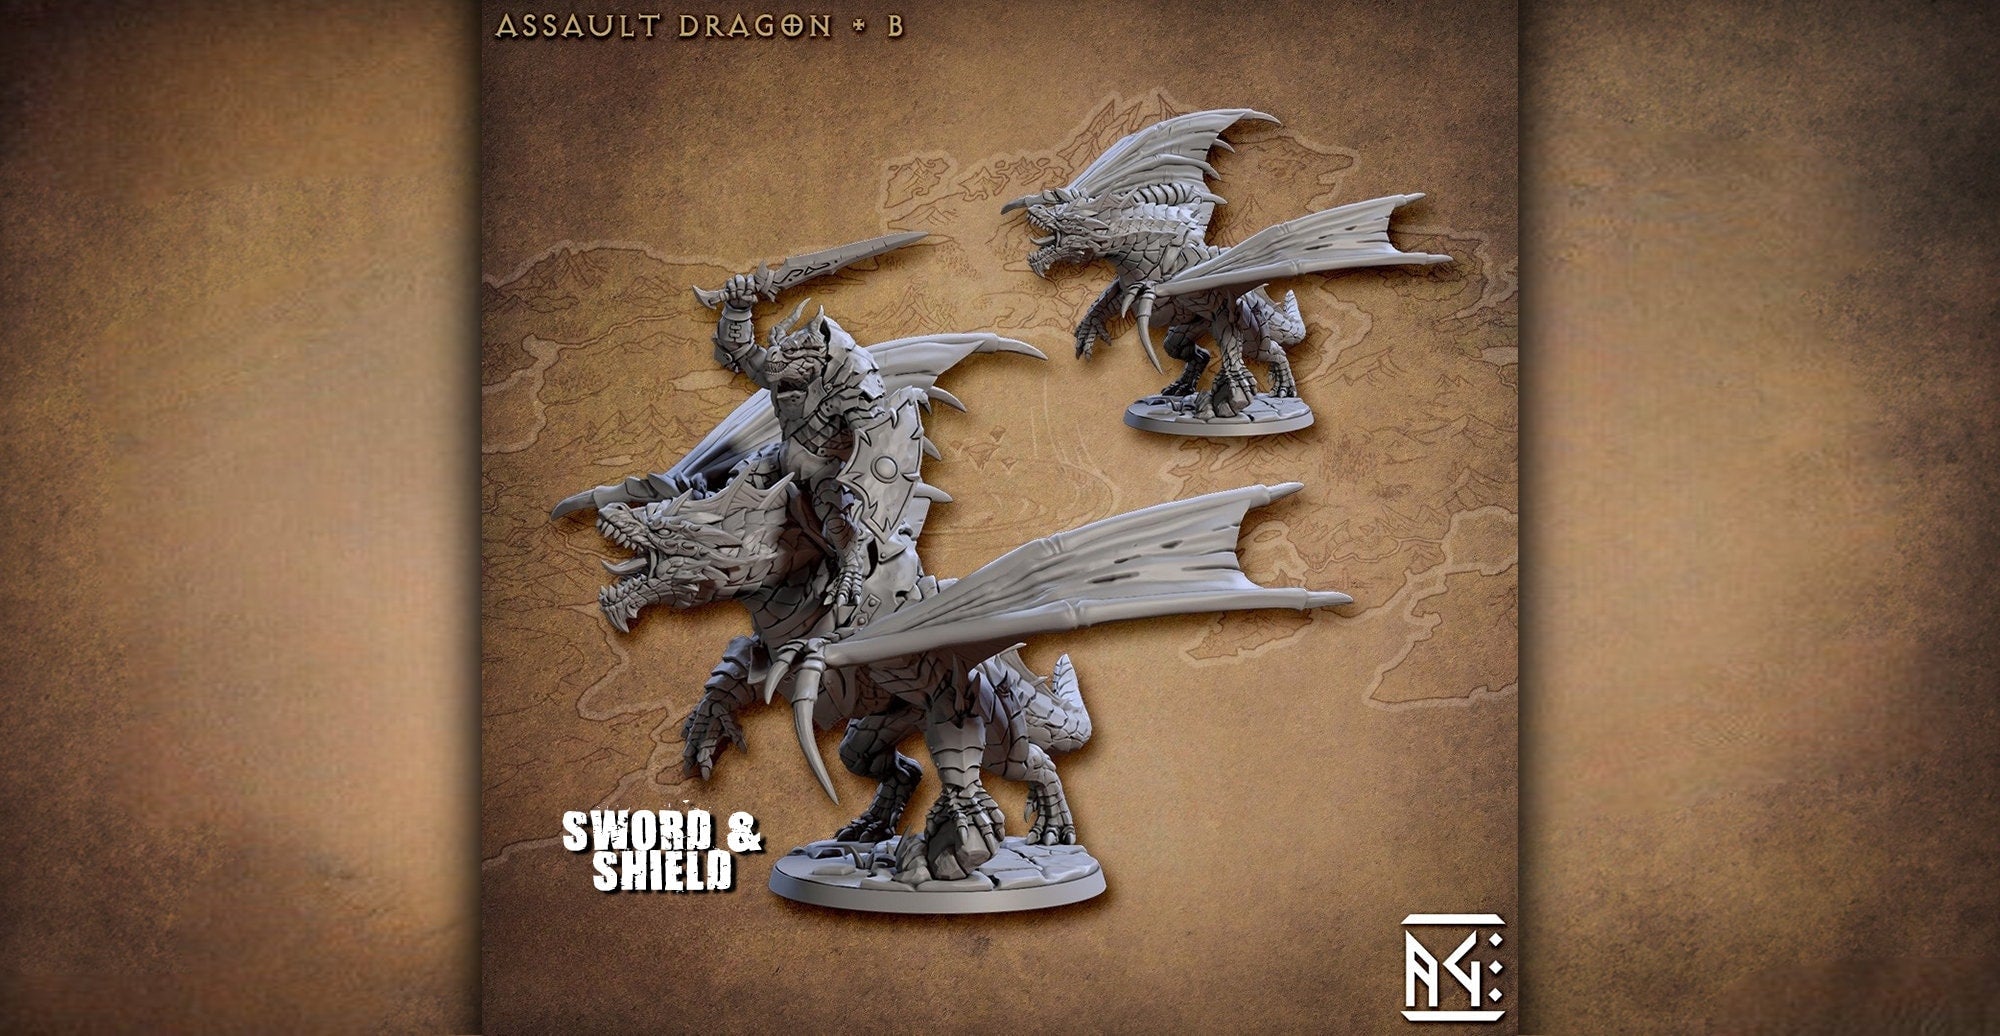 Dragon "Assault Dragon B" (+Rider) | Dungeons and Dragons | DnD | Pathfinder | TTRPG | Wargaming | RPG | Hero Size | 28-32 mm-Role Playing Miniatures